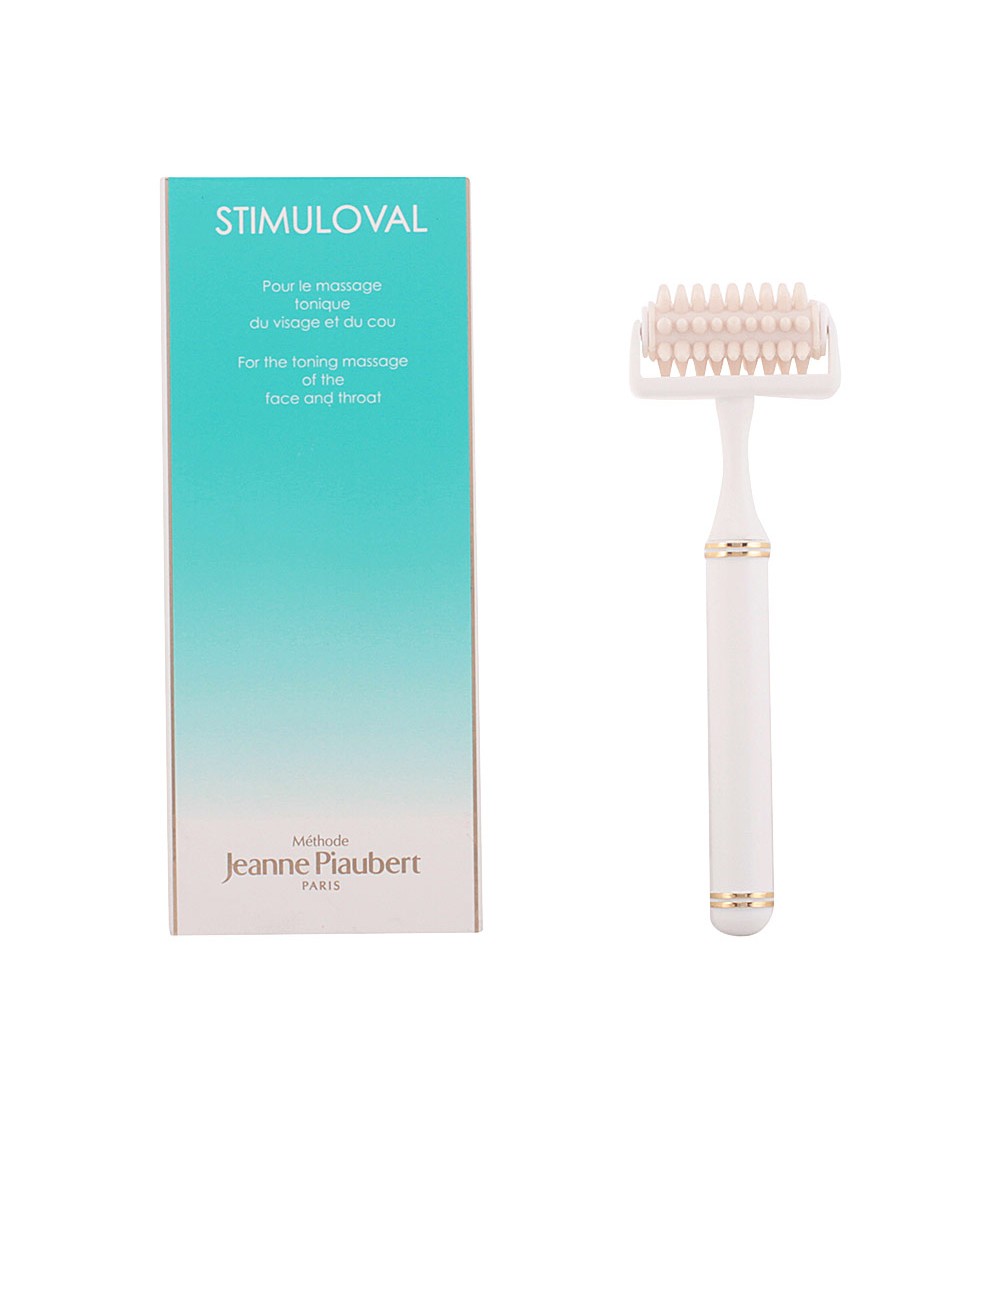 STIMULOVAL toning massage of the face and throat 1 pièces